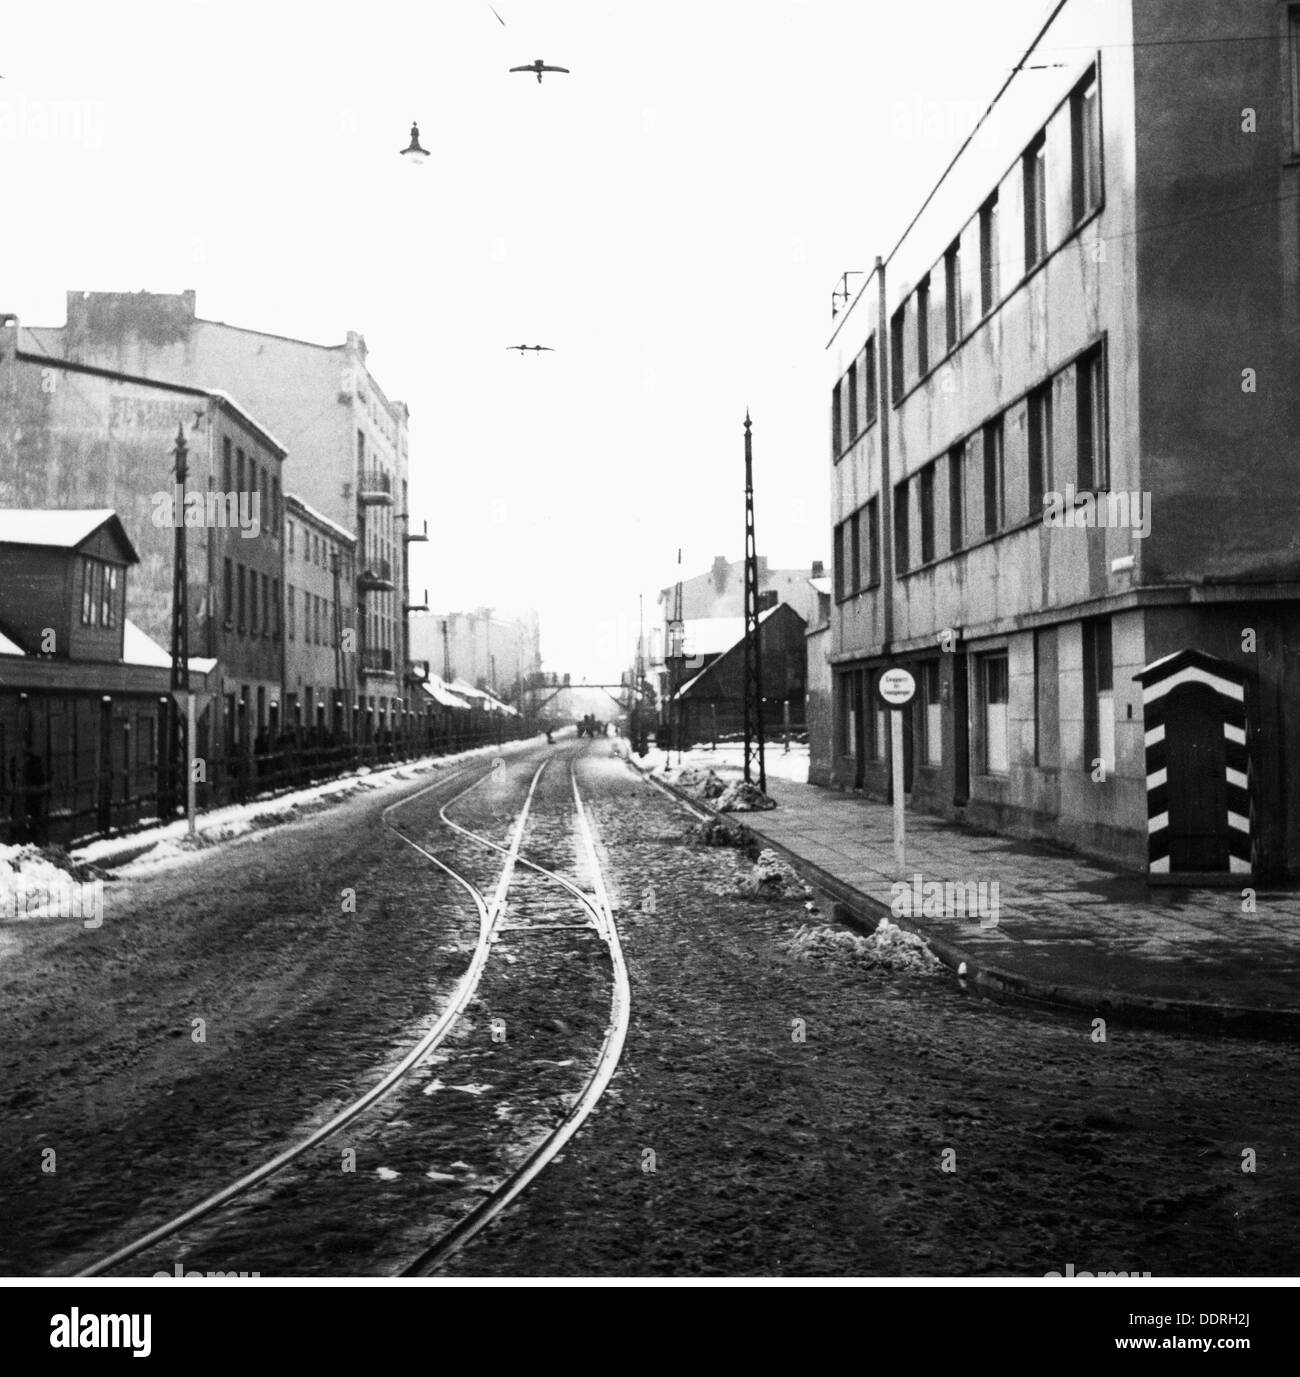 Nazism / National Socialism, crimes, persecution of the Jews, Litzmannstadt Ghetto (Lodz), rails of the tram, 1940, Additional-Rights-Clearences-Not Available Stock Photo